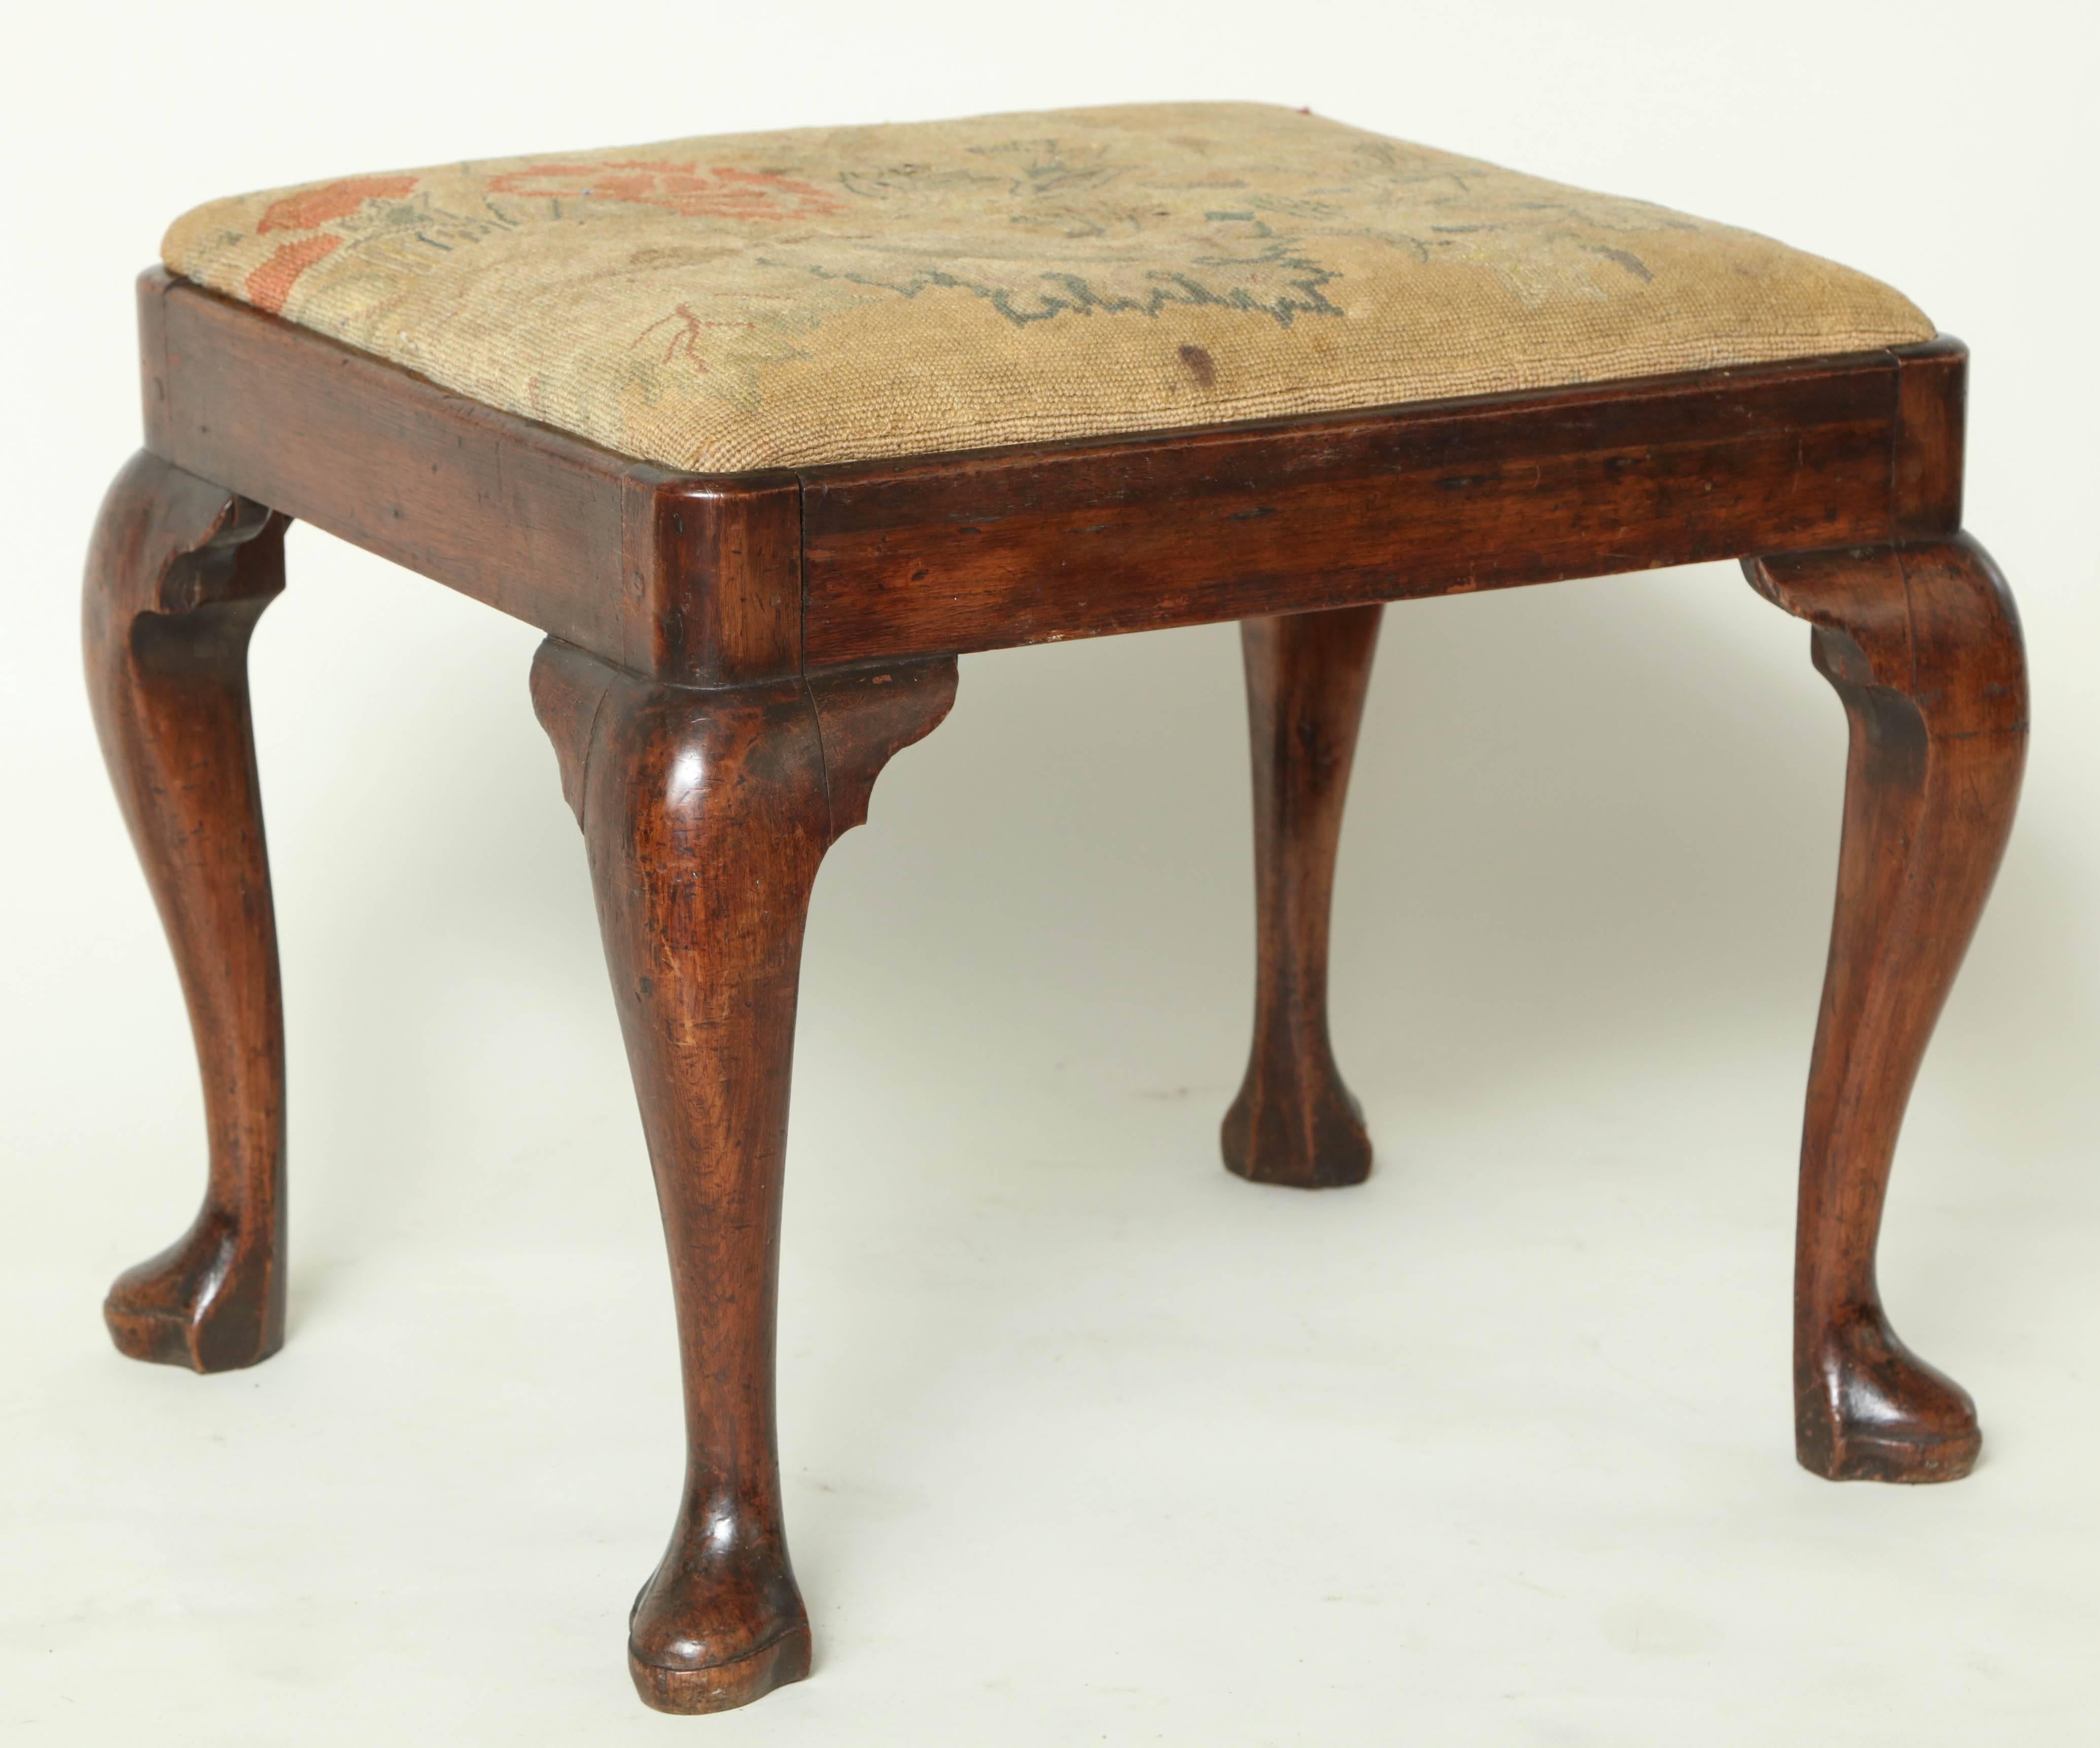 Good 18th century George II walnut stool, with upholstered slip seat, the apron with slightly molded top edge, standing on cabriole legs with shaped corner brackets and standing on triffid feet, the whole with good rich color.